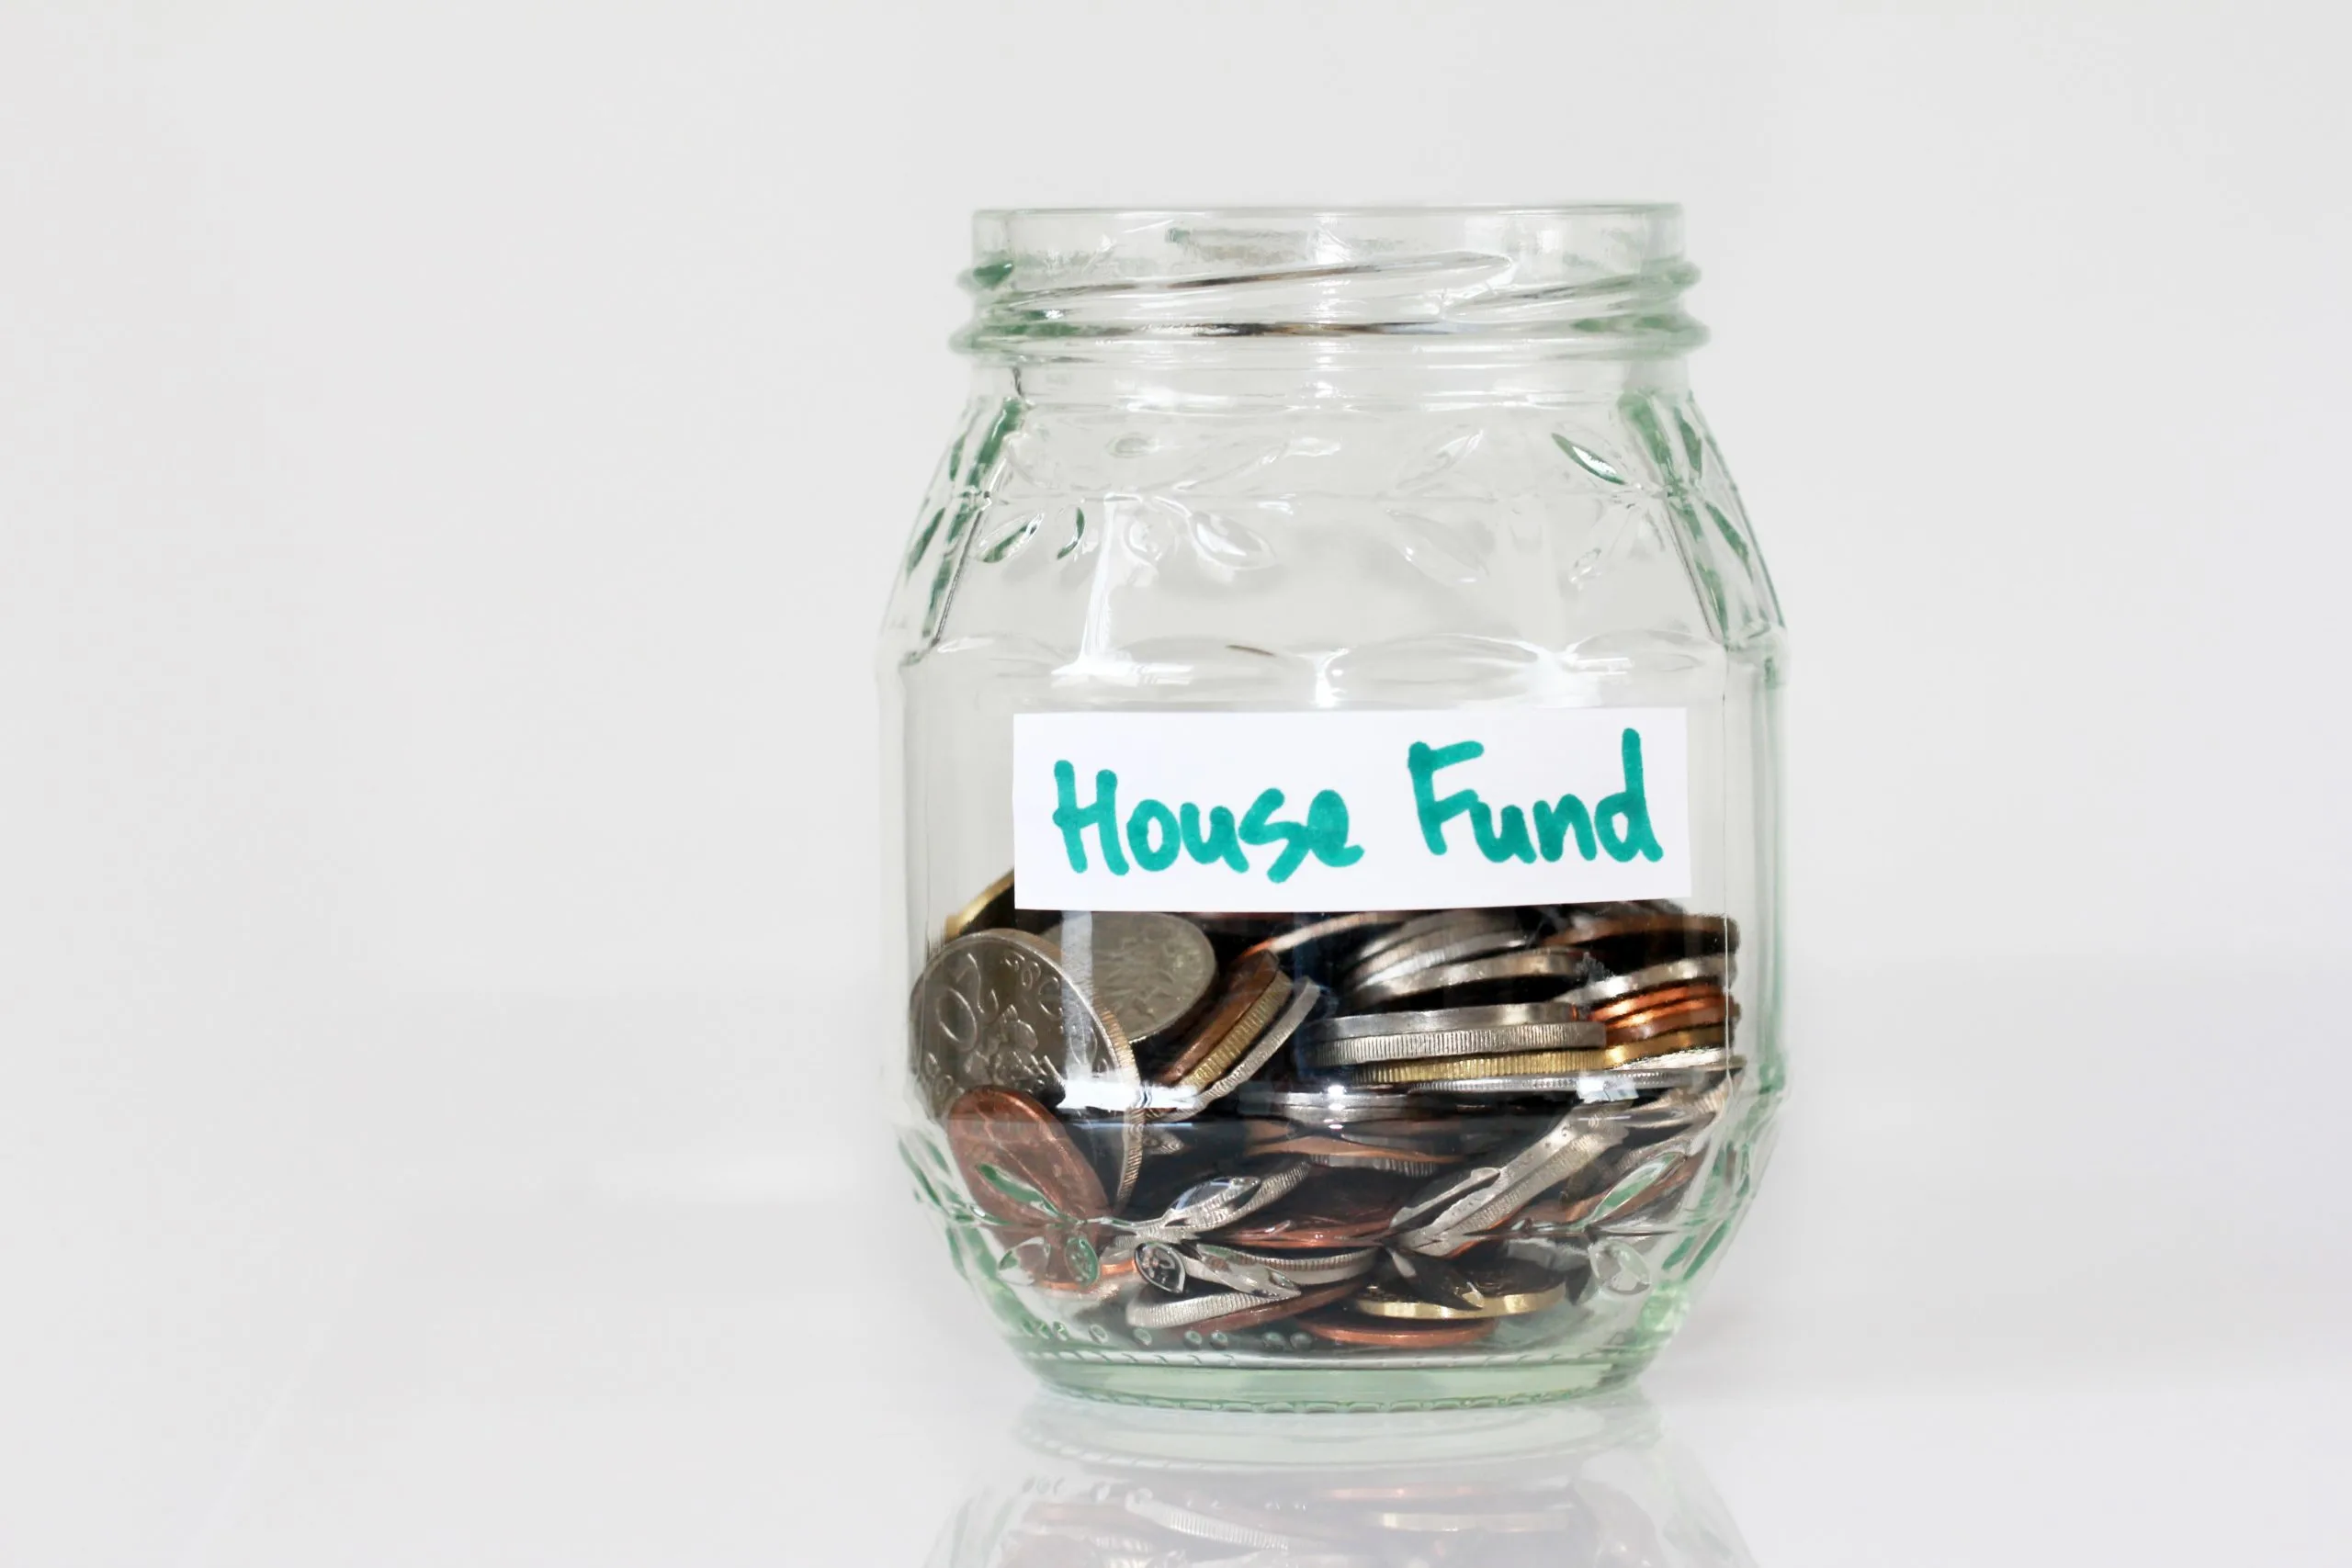 coin jar labeled with the words "house fund" in article about how to get free money